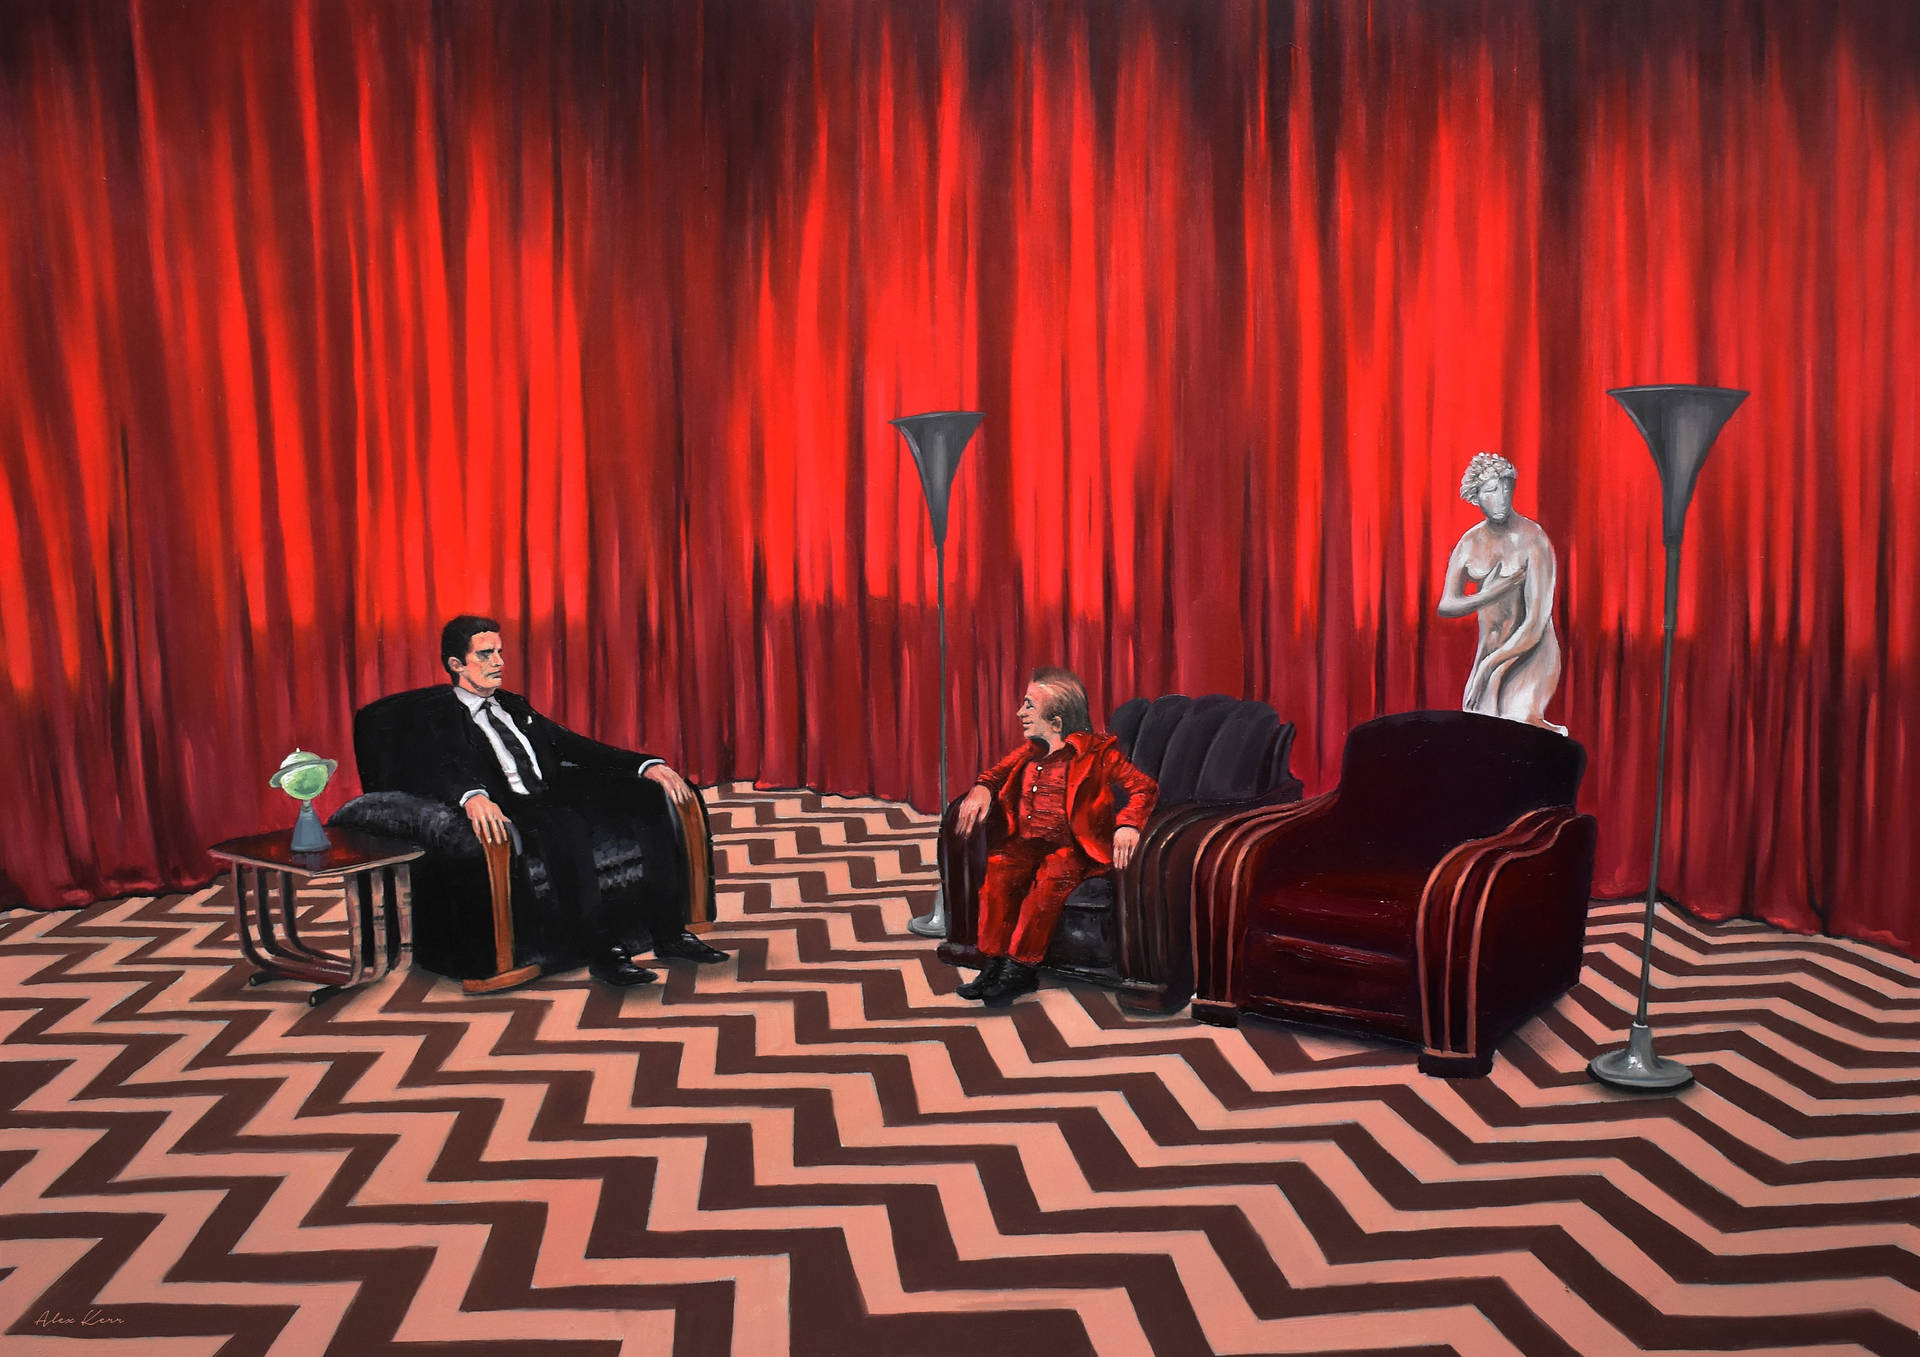 Twin Peaks Red Interview Background